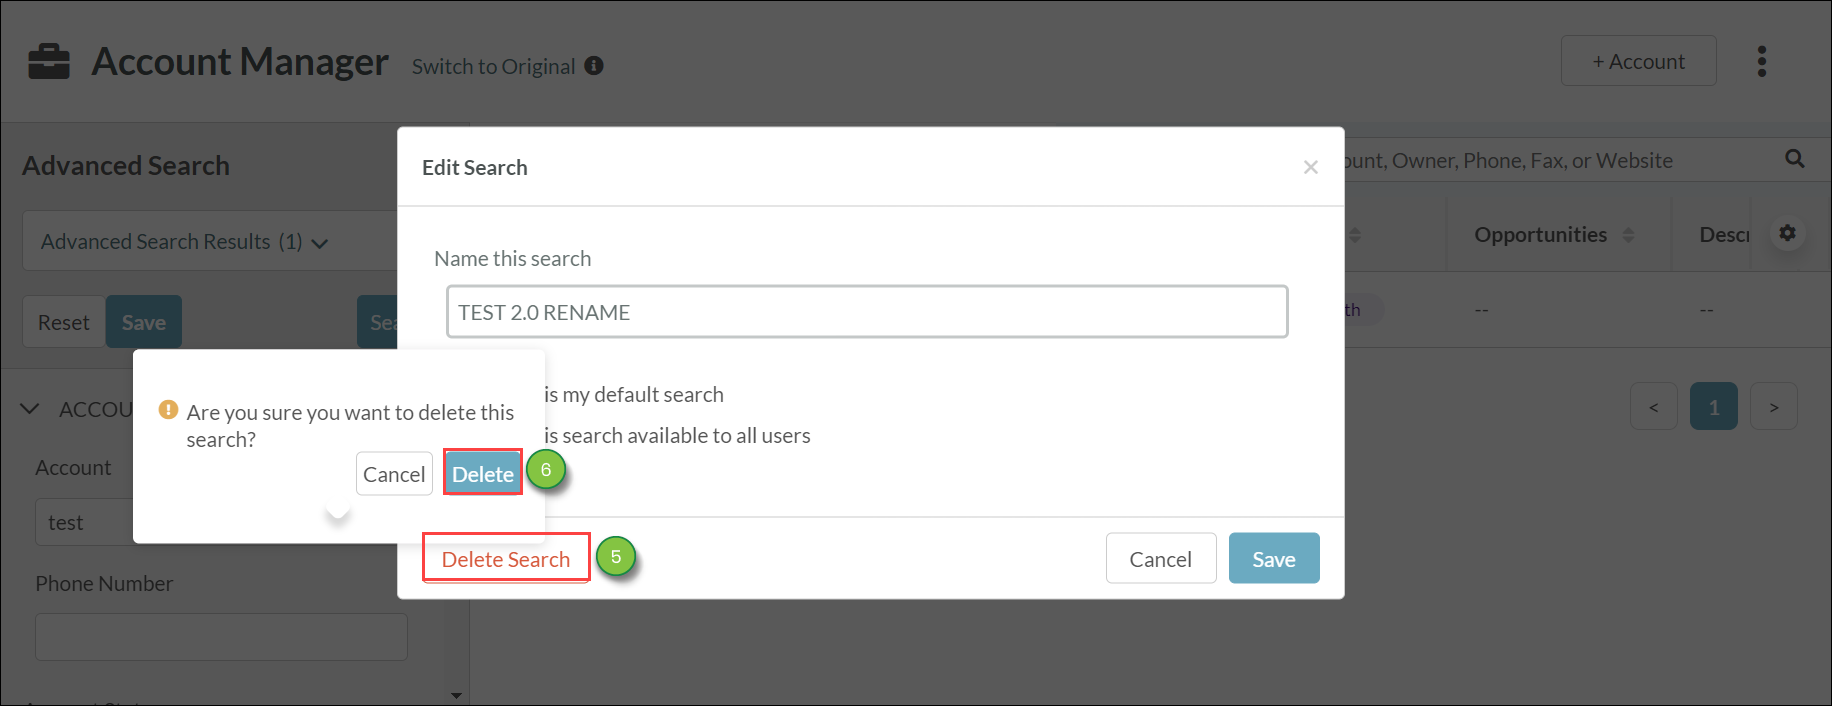 Using Advanced Search Account Manager